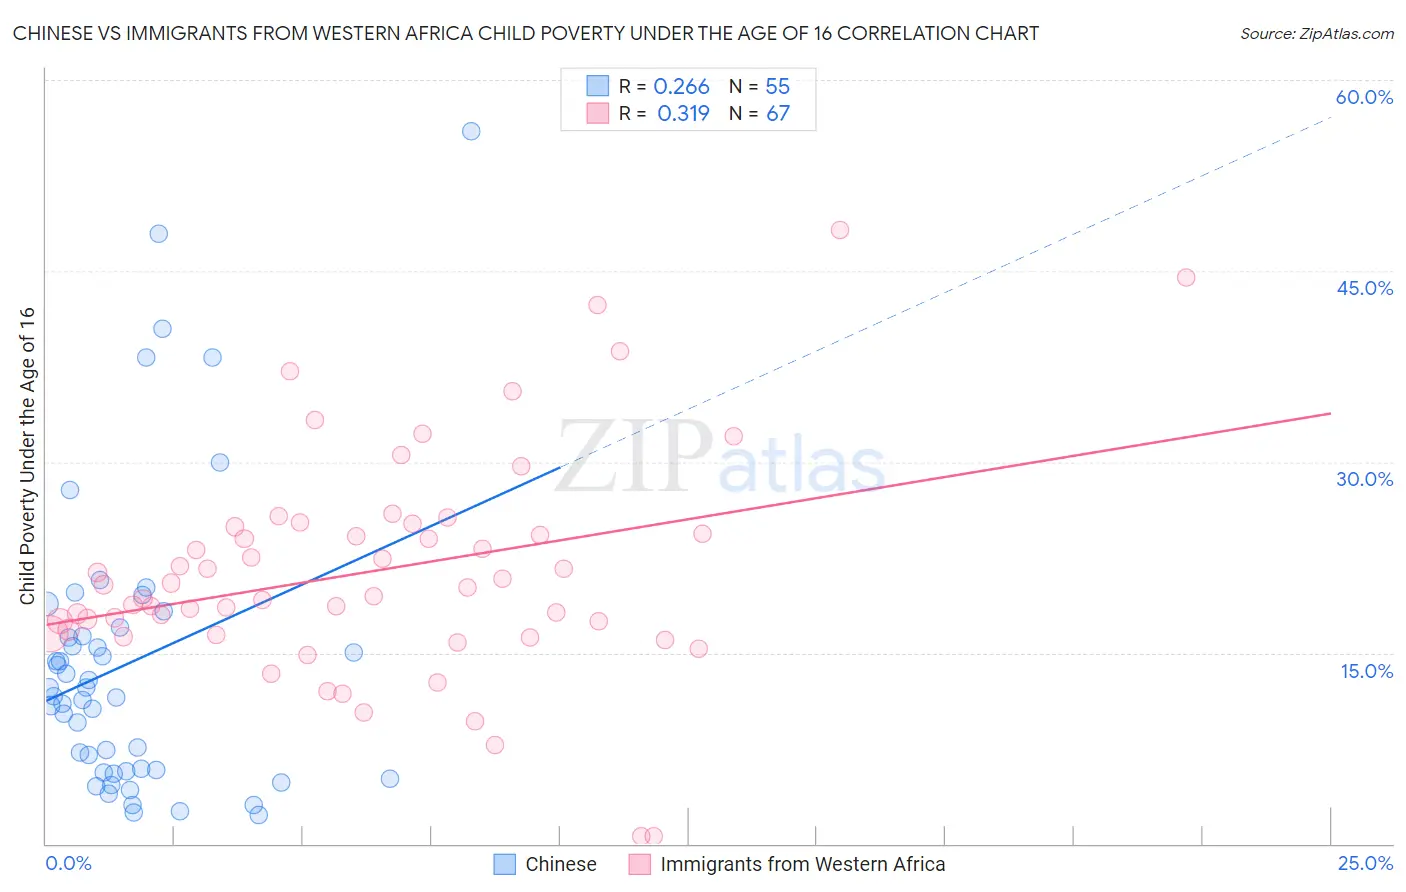 Chinese vs Immigrants from Western Africa Child Poverty Under the Age of 16